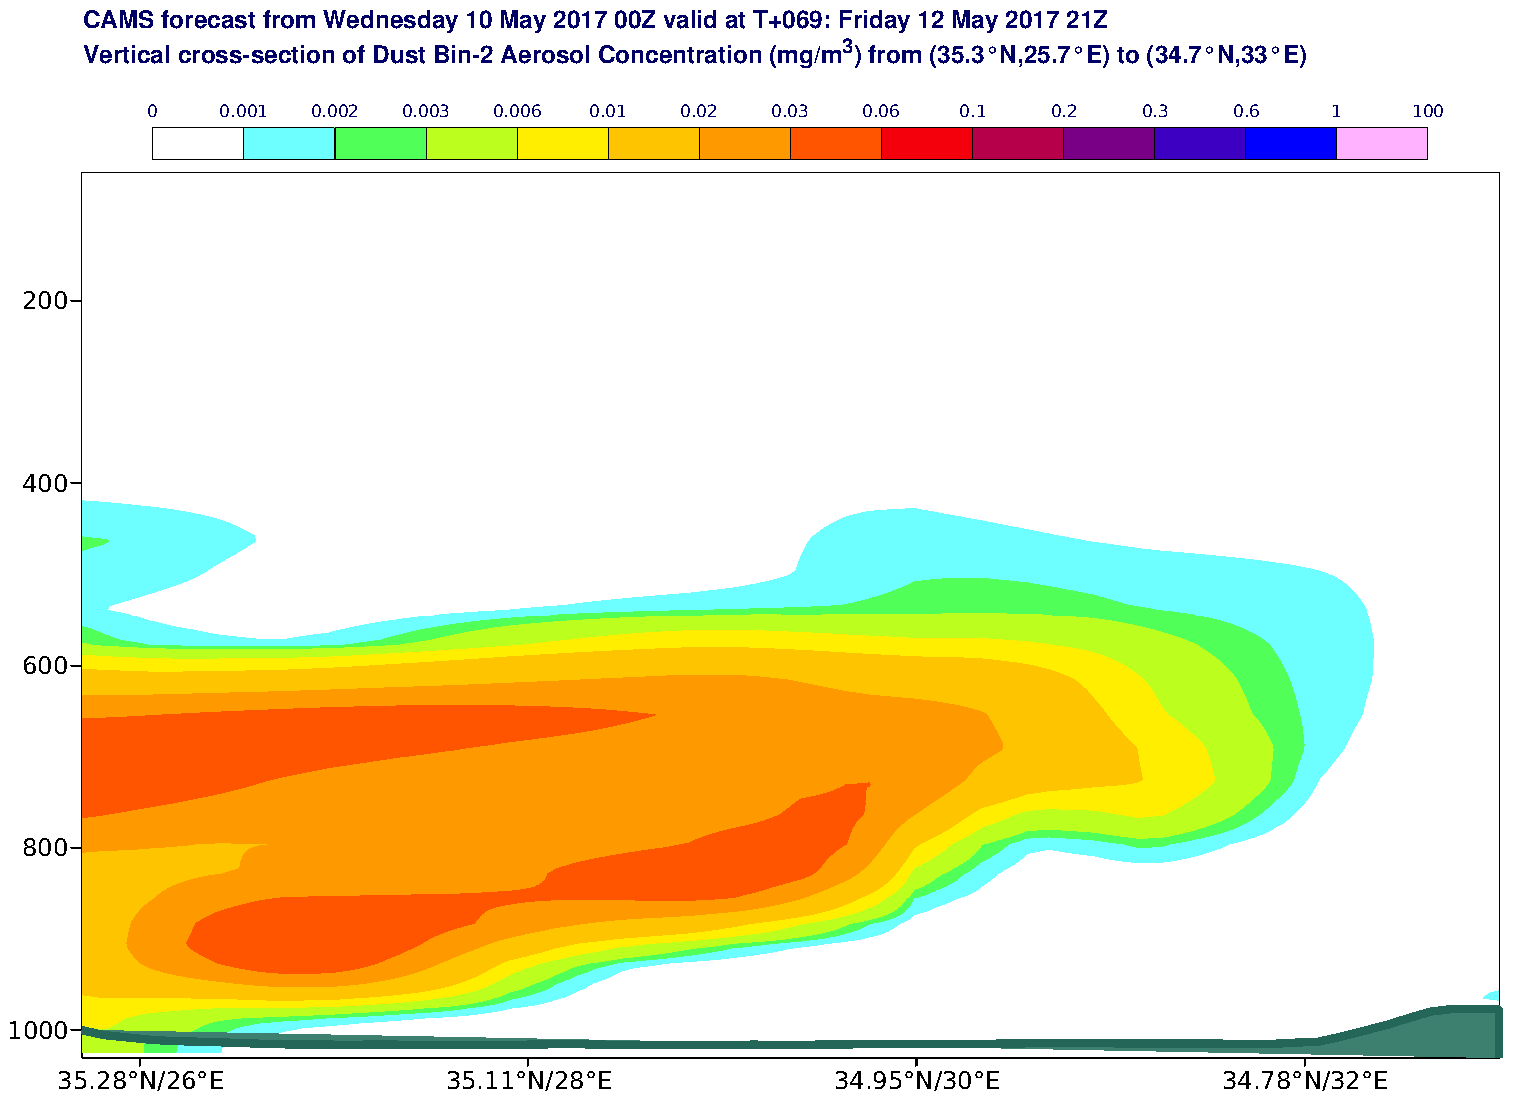 Vertical cross-section of Dust Bin-2 Aerosol Concentration (mg/m3) valid at T69 - 2017-05-12 21:00